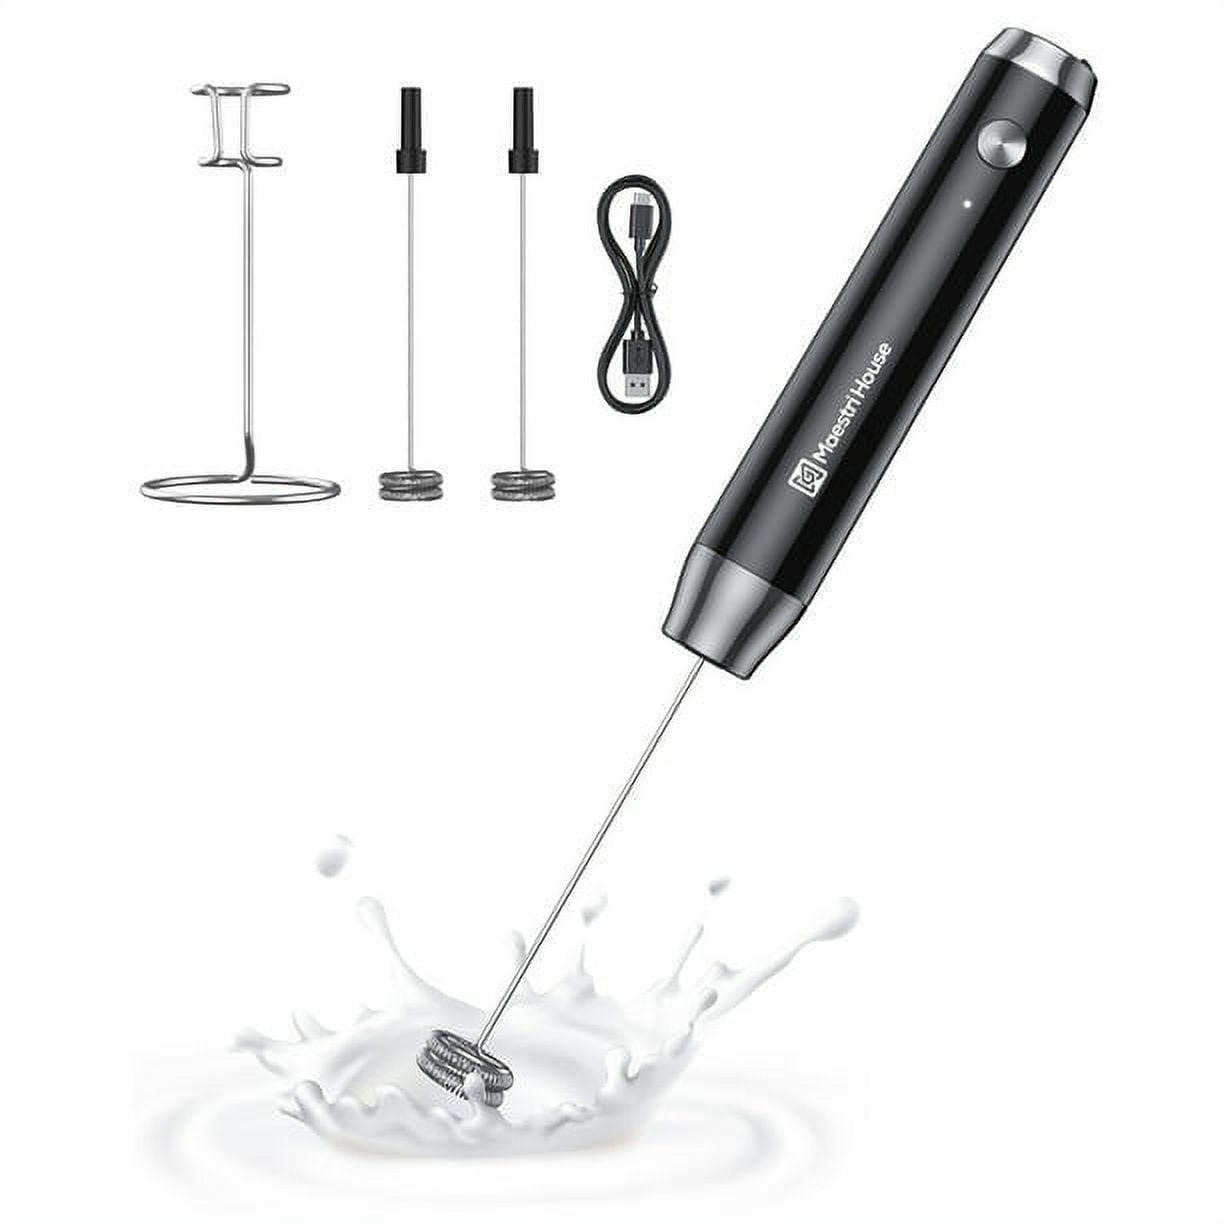 Frother Holder Stainless Steel Multi Functional Milk Frother Holder for Handheld, Size: 5.9cmx2.7cm